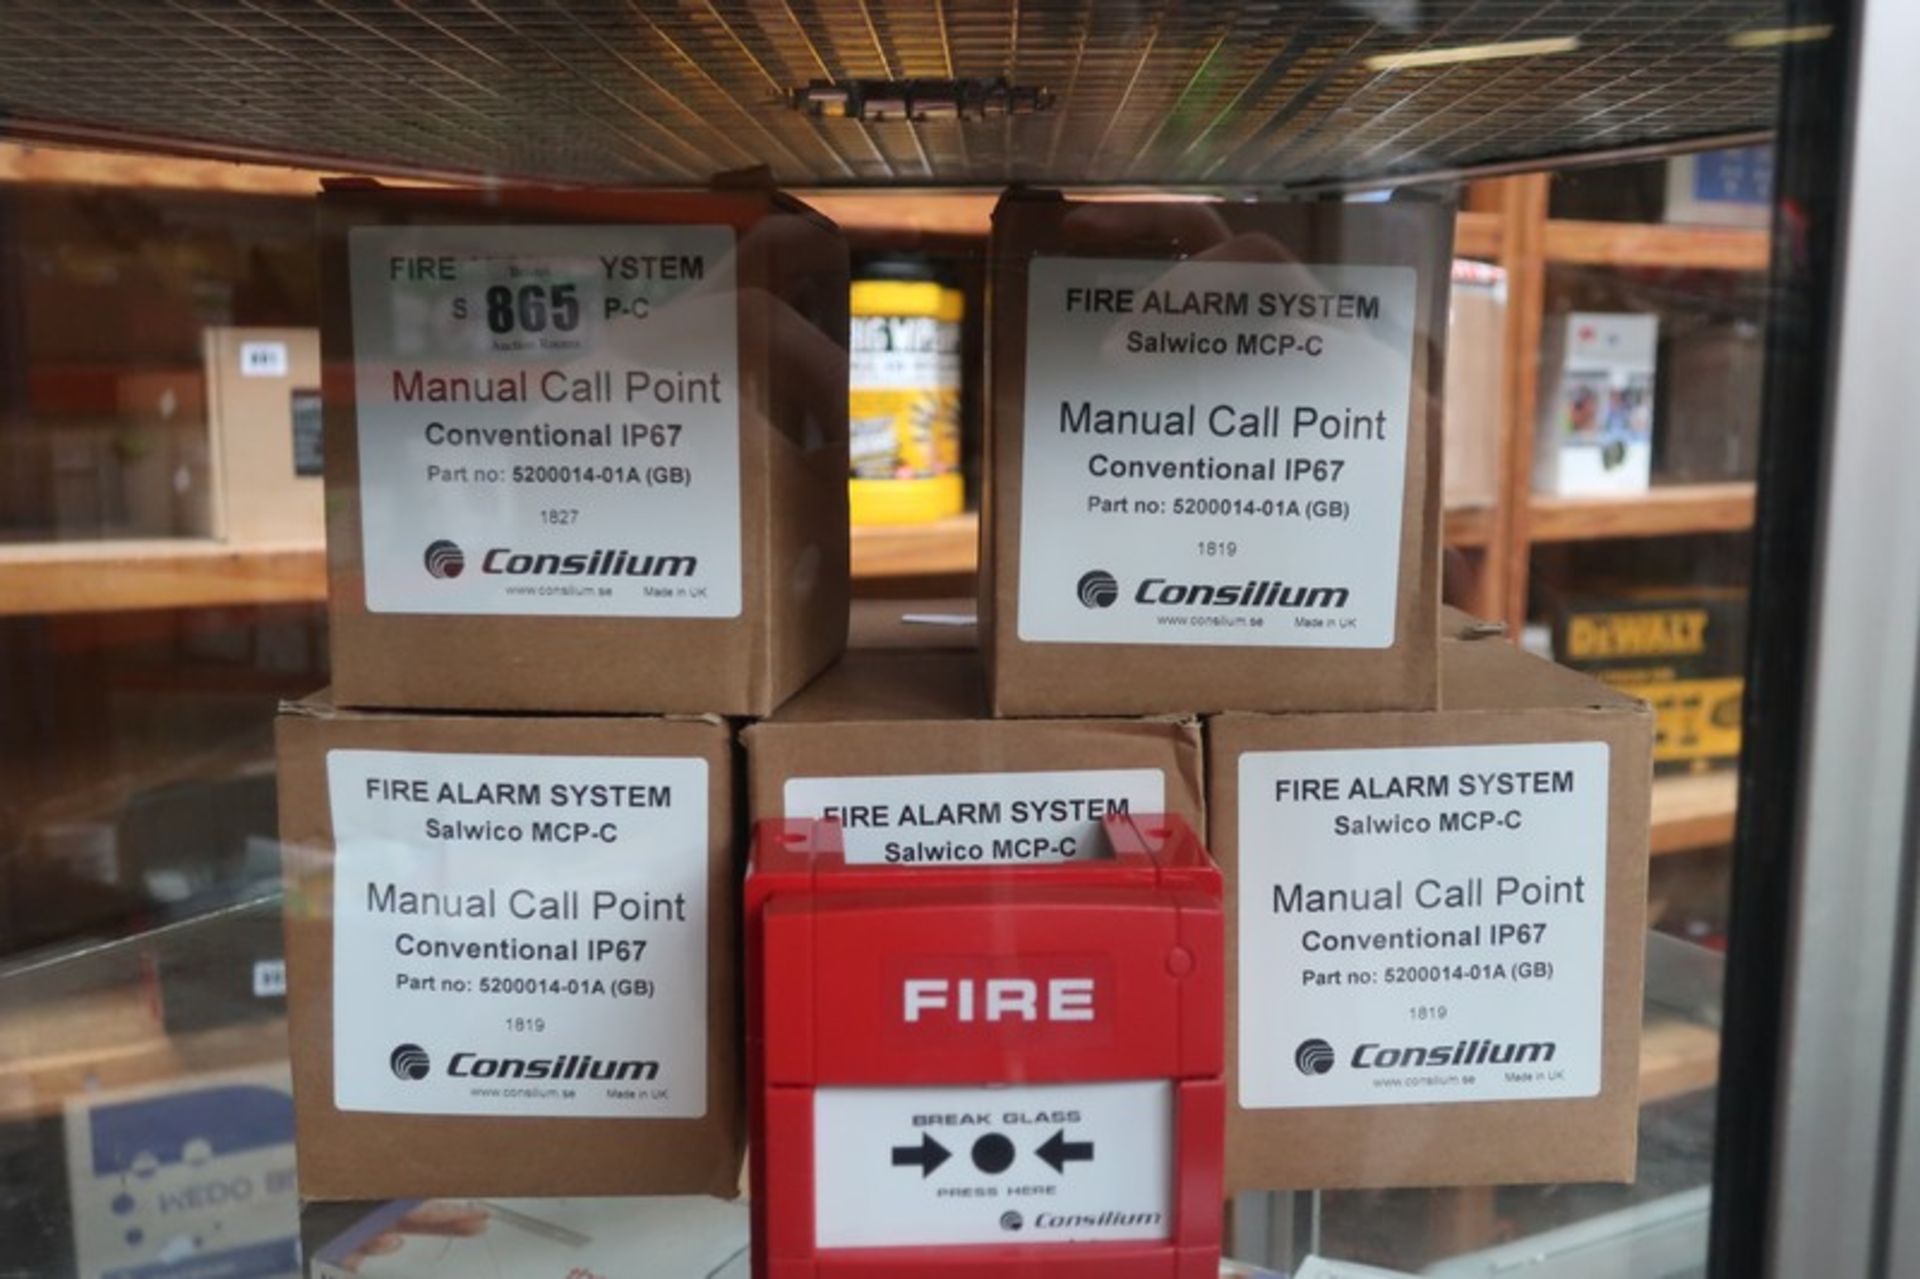 Eight as new Consilium fire alarm system call points.